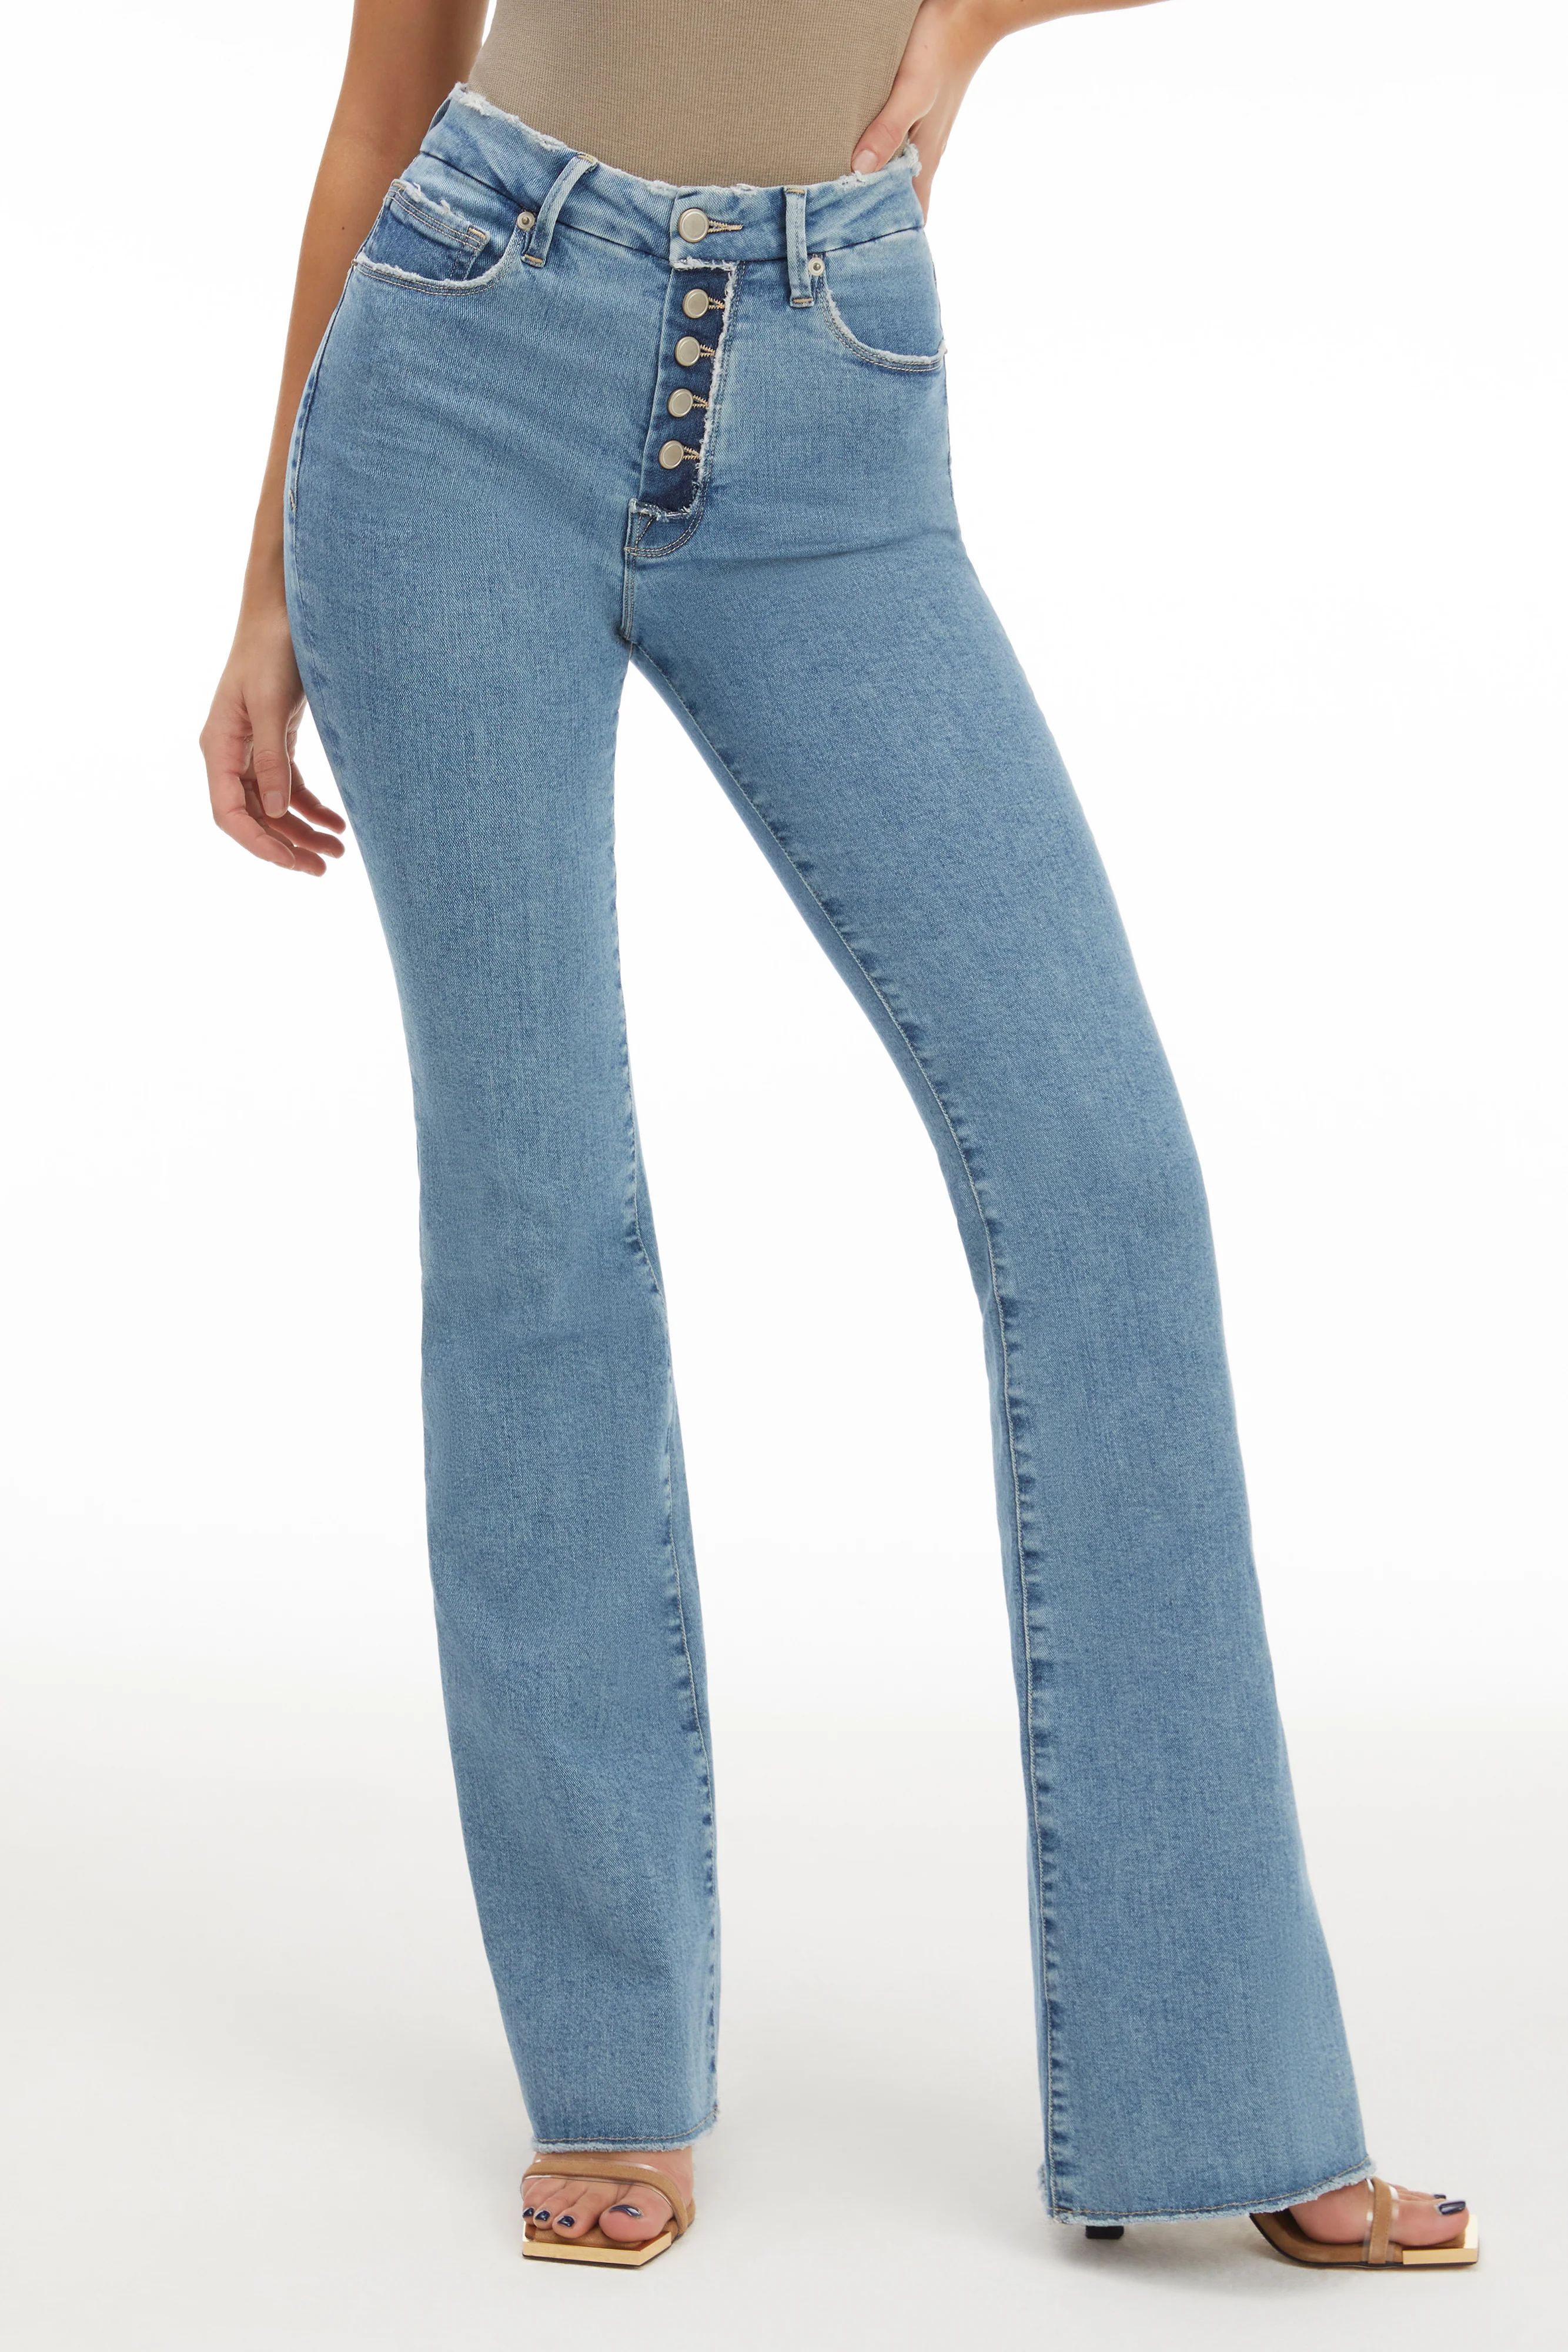 GOOD FLARE JEANS | BLUE670 | Good American